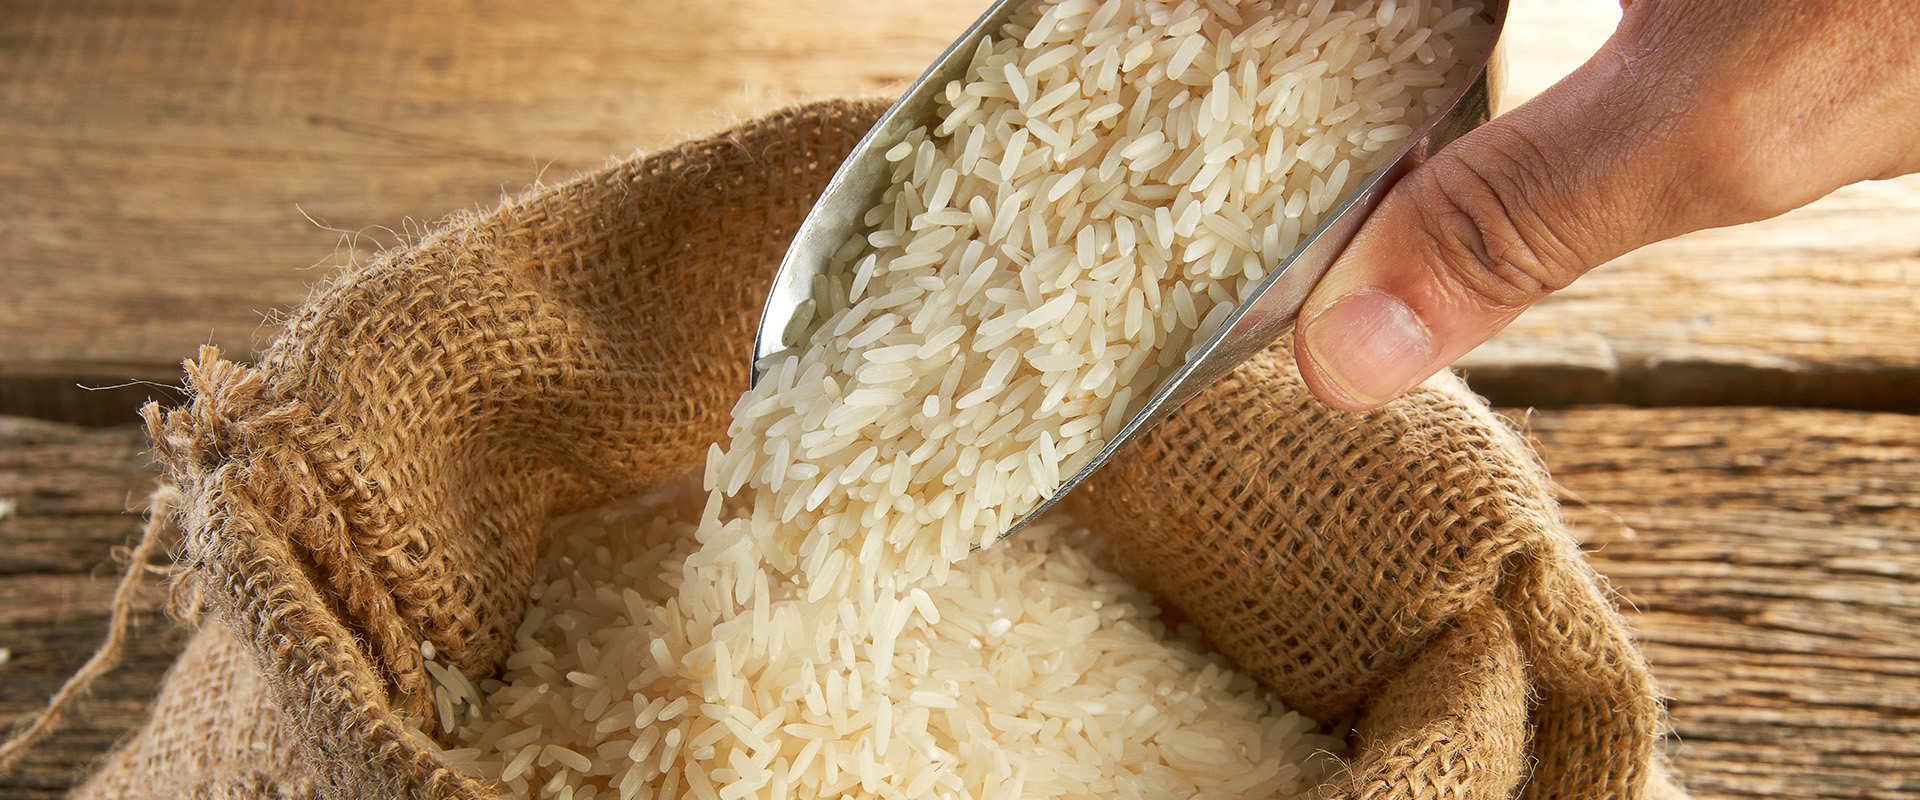 Premium Quality Rice - Ideal Cash and Carry